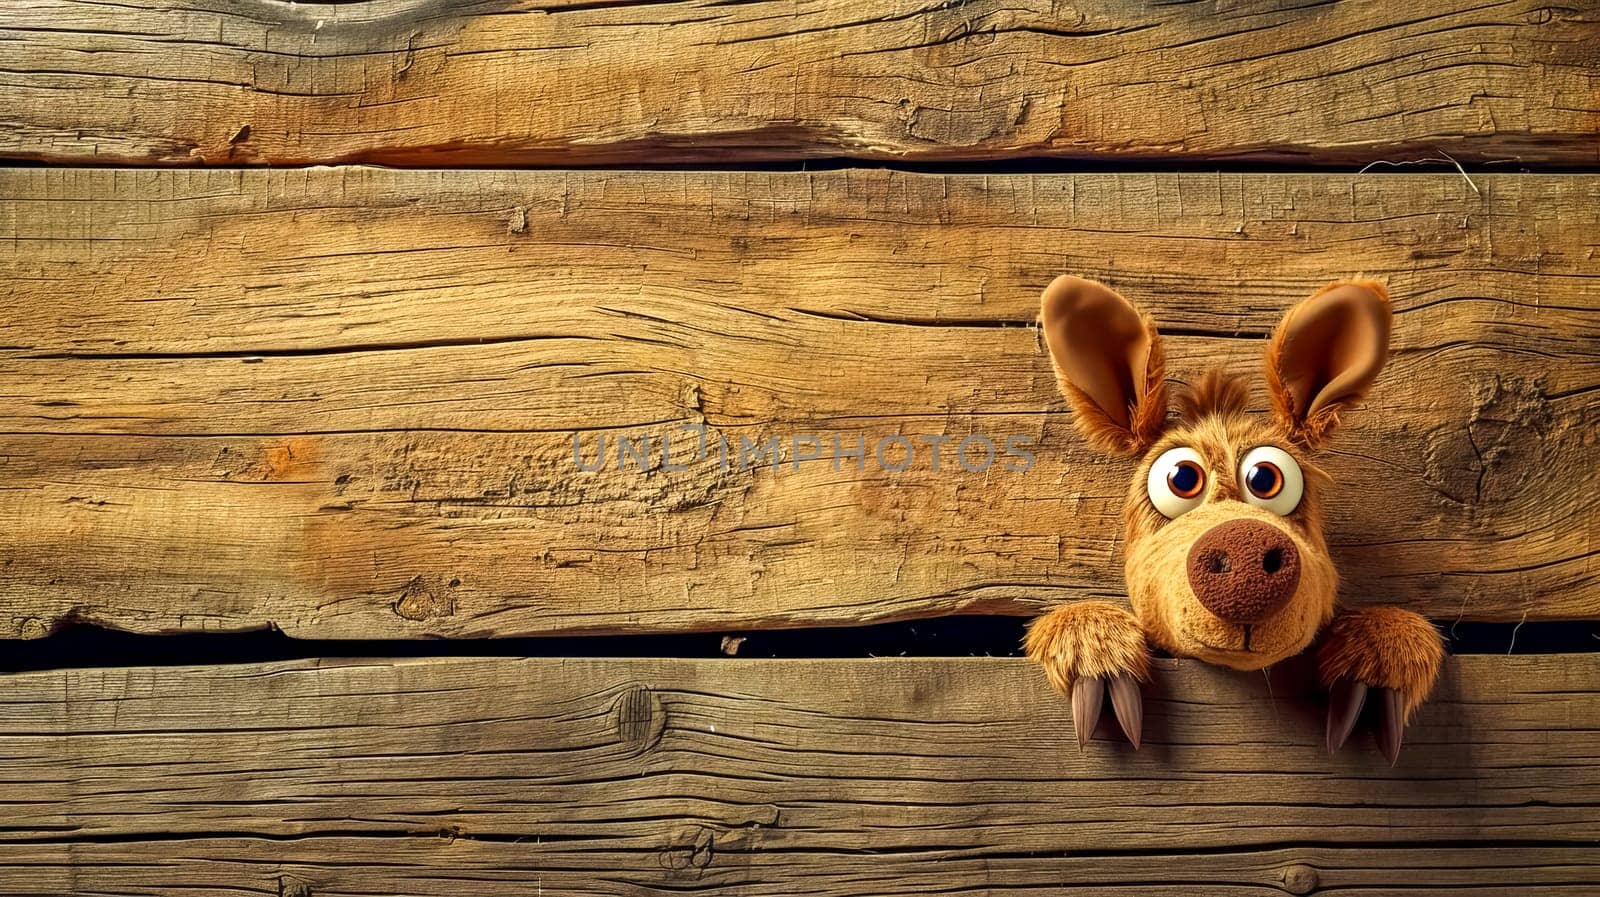 cartoon-like creature peeking through wooden planks, with a playful and curious expression, set against a rustic wooden backdrop. copy space